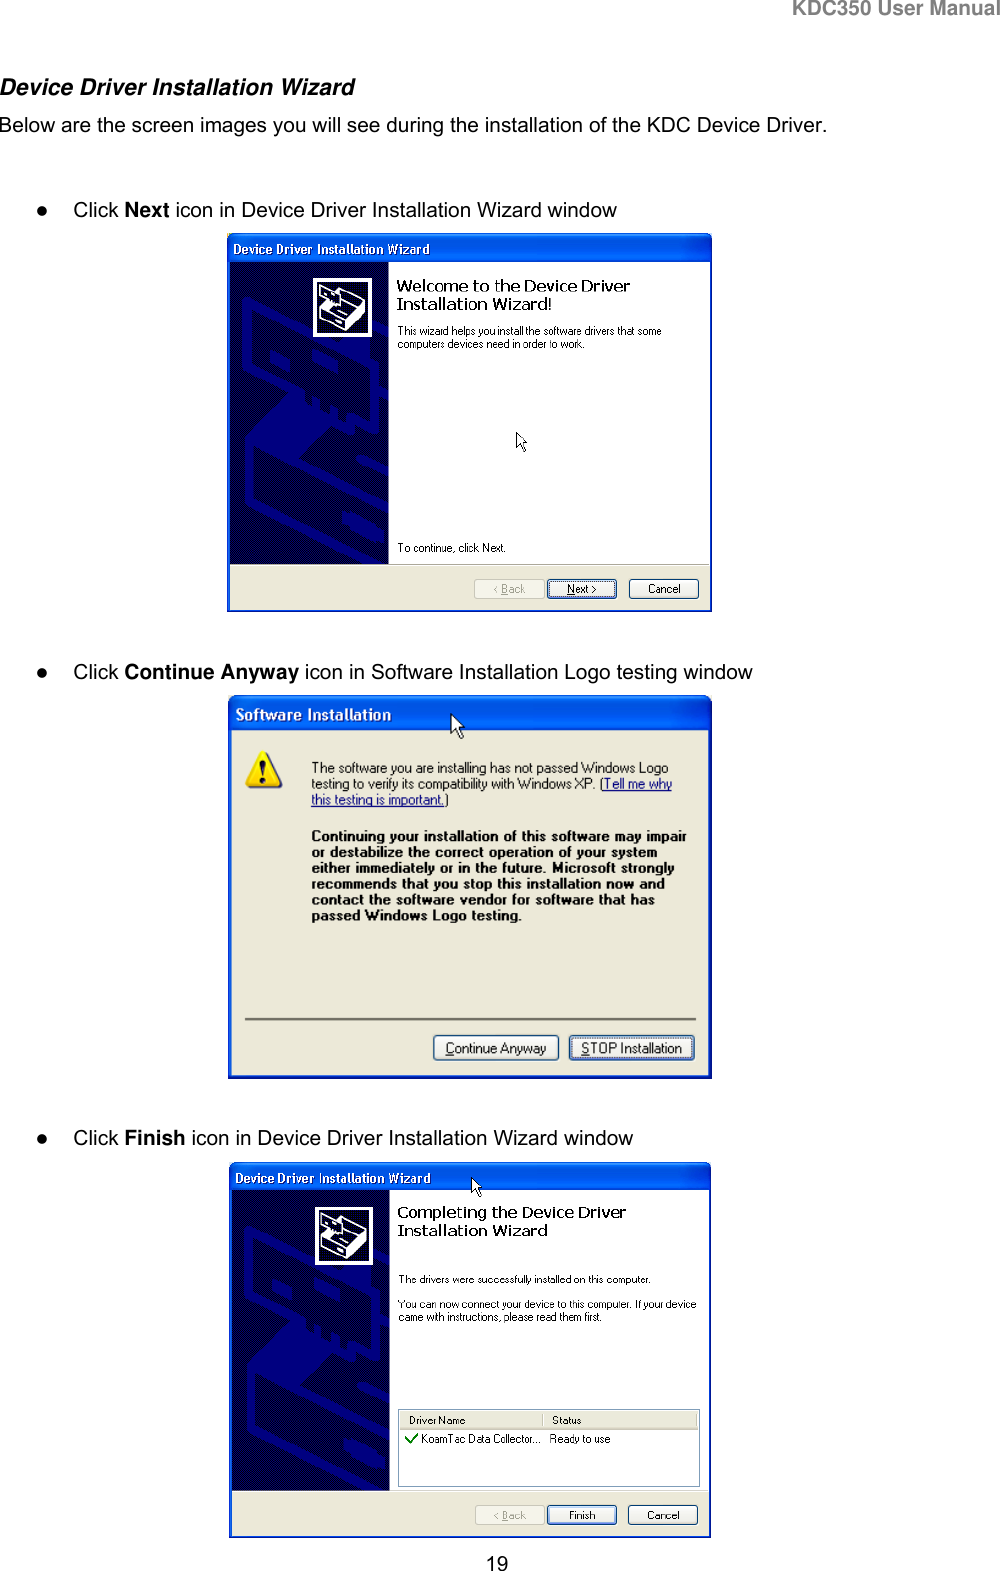 KDC350 User Manual  19  Device Driver Installation Wizard Below are the screen images you will see during the installation of the KDC Device Driver.     Click Next icon in Device Driver Installation Wizard window    Click Continue Anyway icon in Software Installation Logo testing window    Click Finish icon in Device Driver Installation Wizard window  